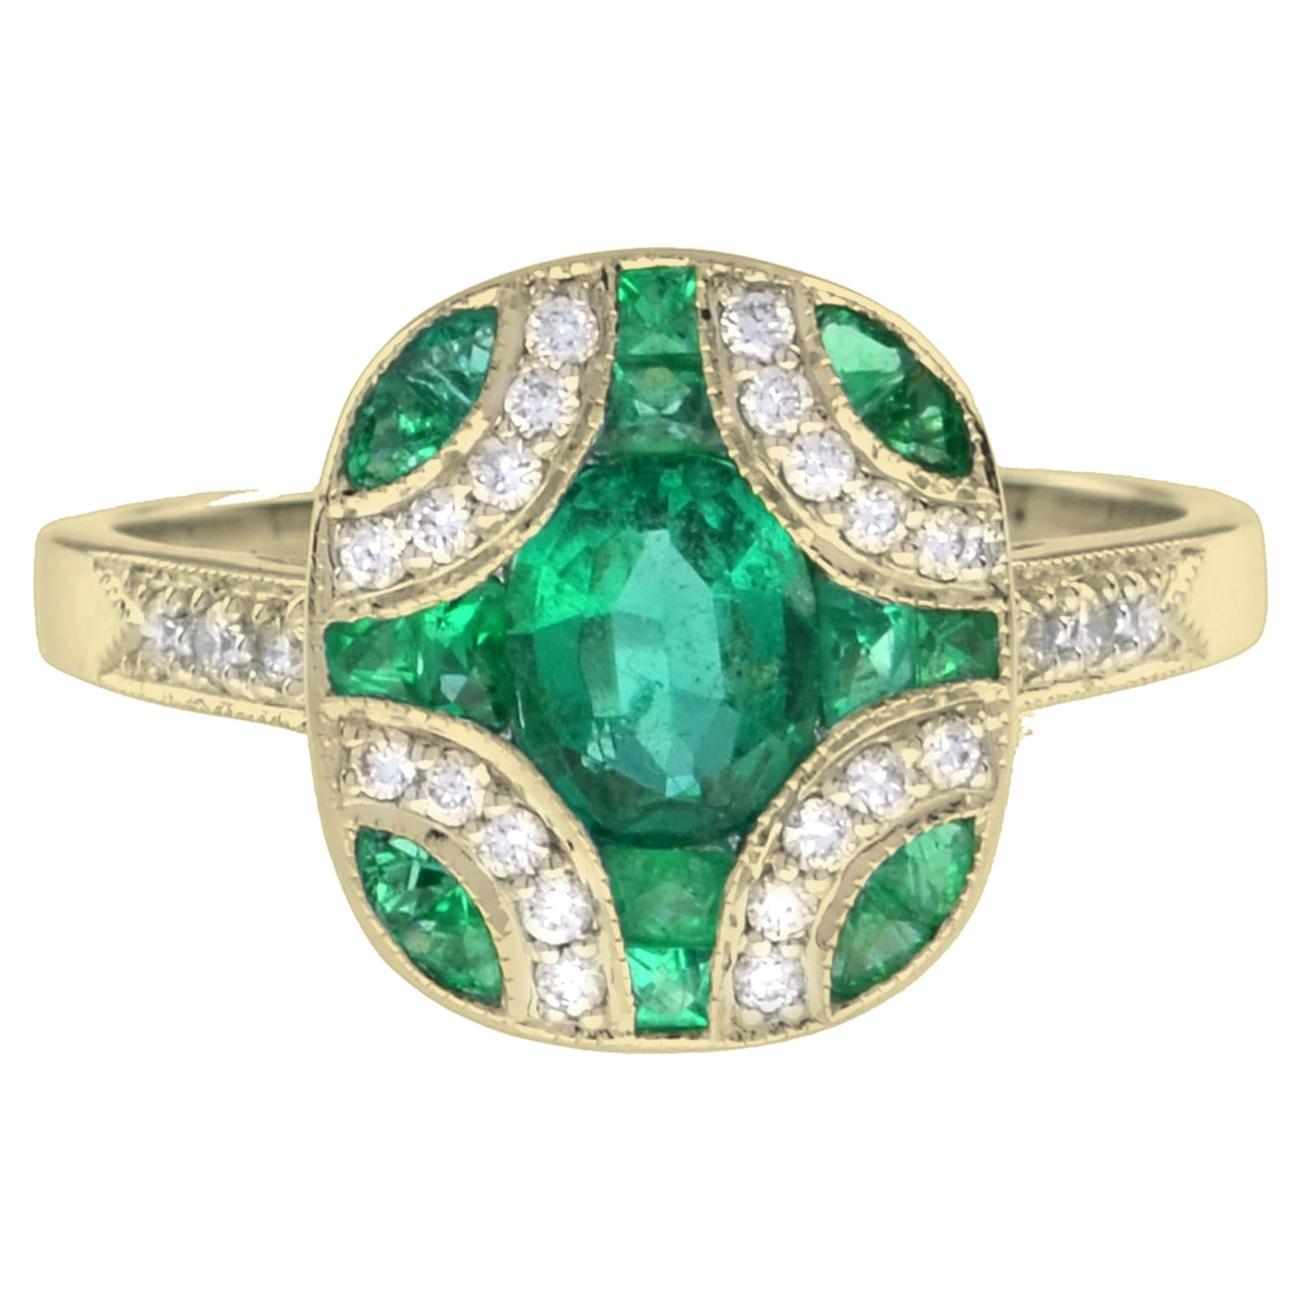 For Sale:  Art Deco Style Oval Emerald with Diamond Ring in 18K Yellow Gold